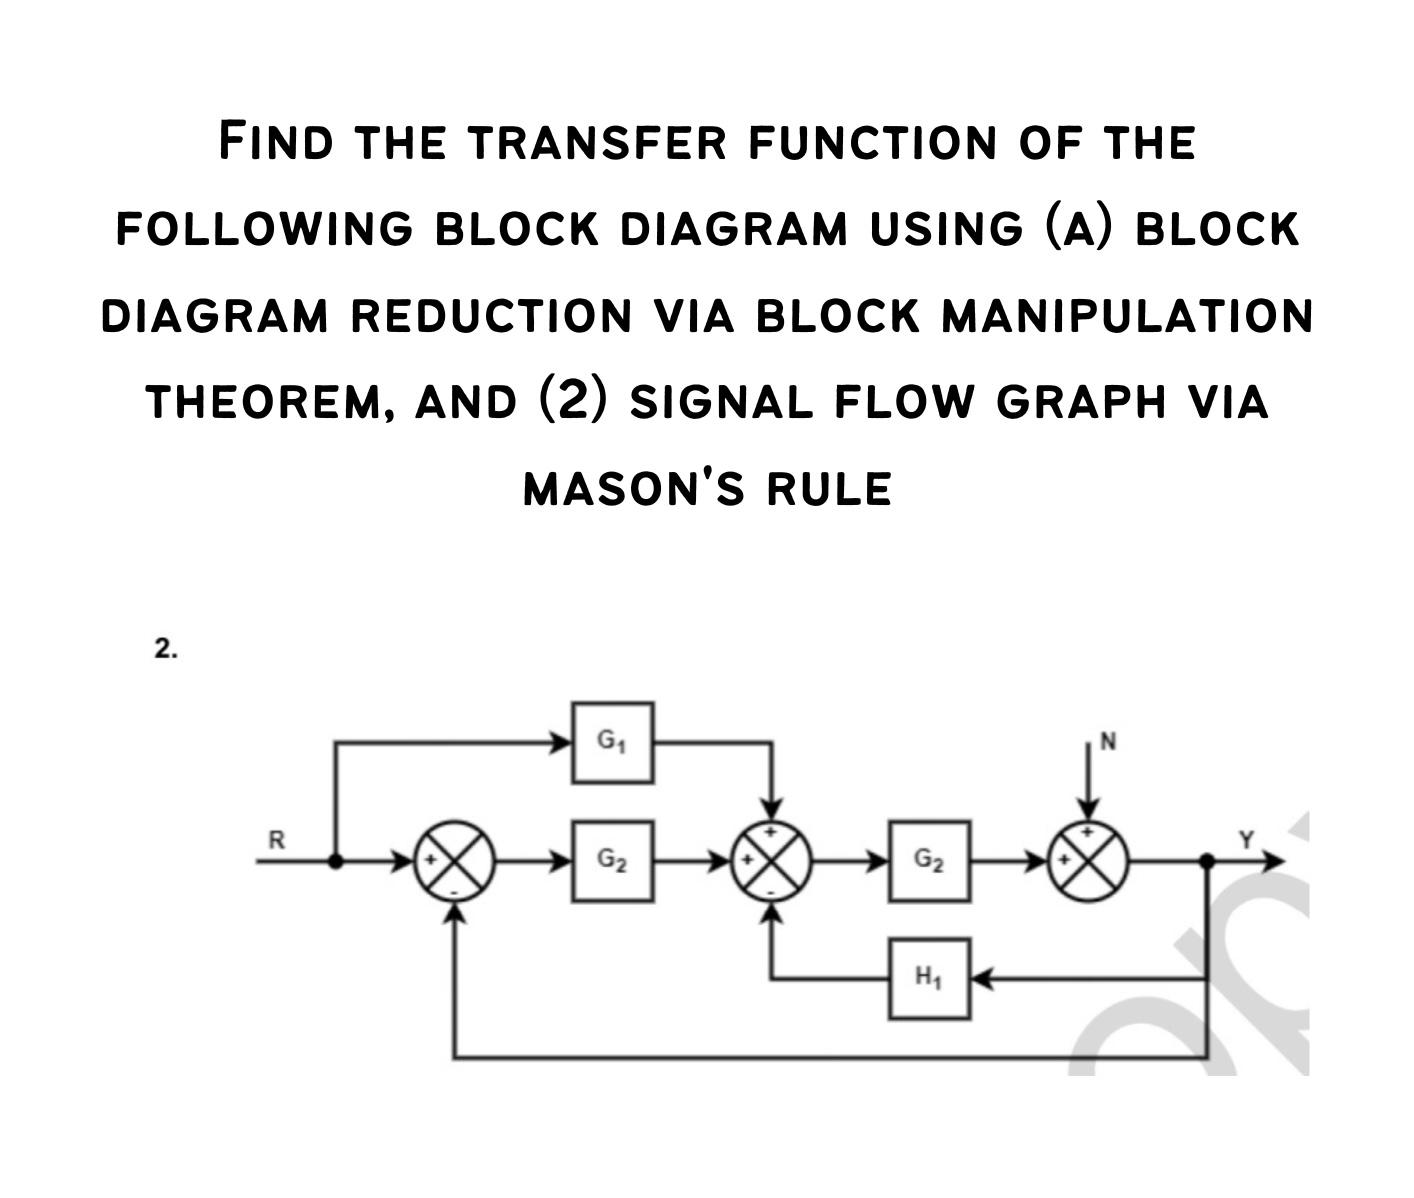 FIND THE TRANSFER FUNCTION OF THE FOLLOWING BLOCK DIAGRAM USING (A) BLOCK DIAGRAM REDUCTION VIA BLOCK